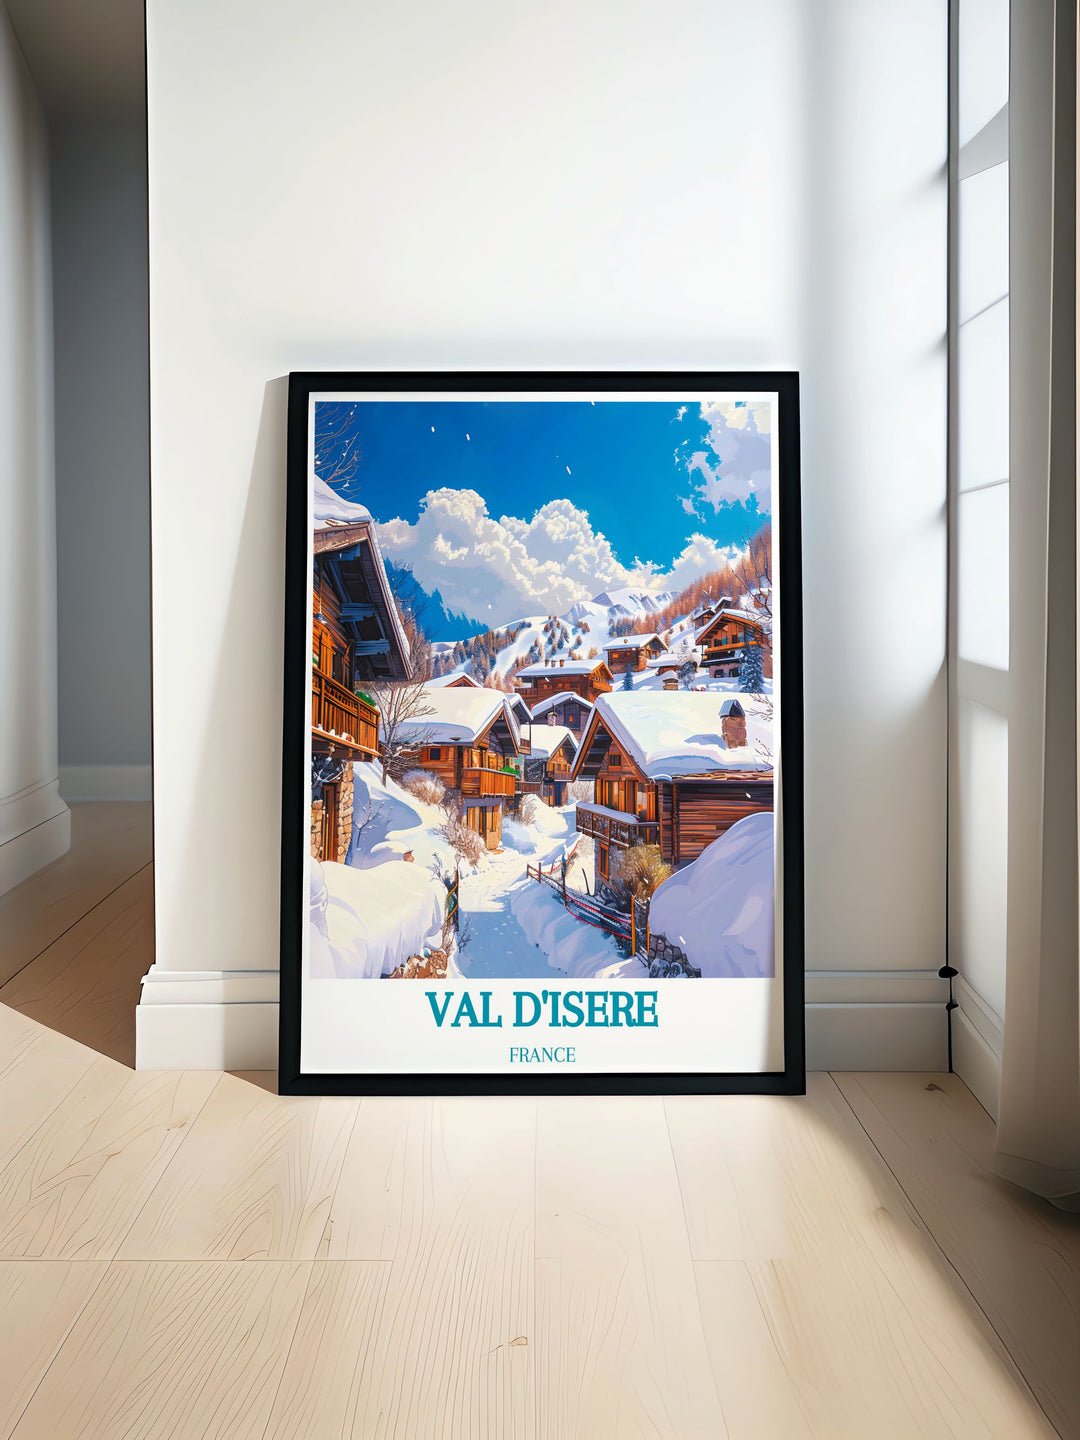 Discover the historical depth of Val dIsere with this vibrant art print, featuring the picturesque streets of its Old Town.